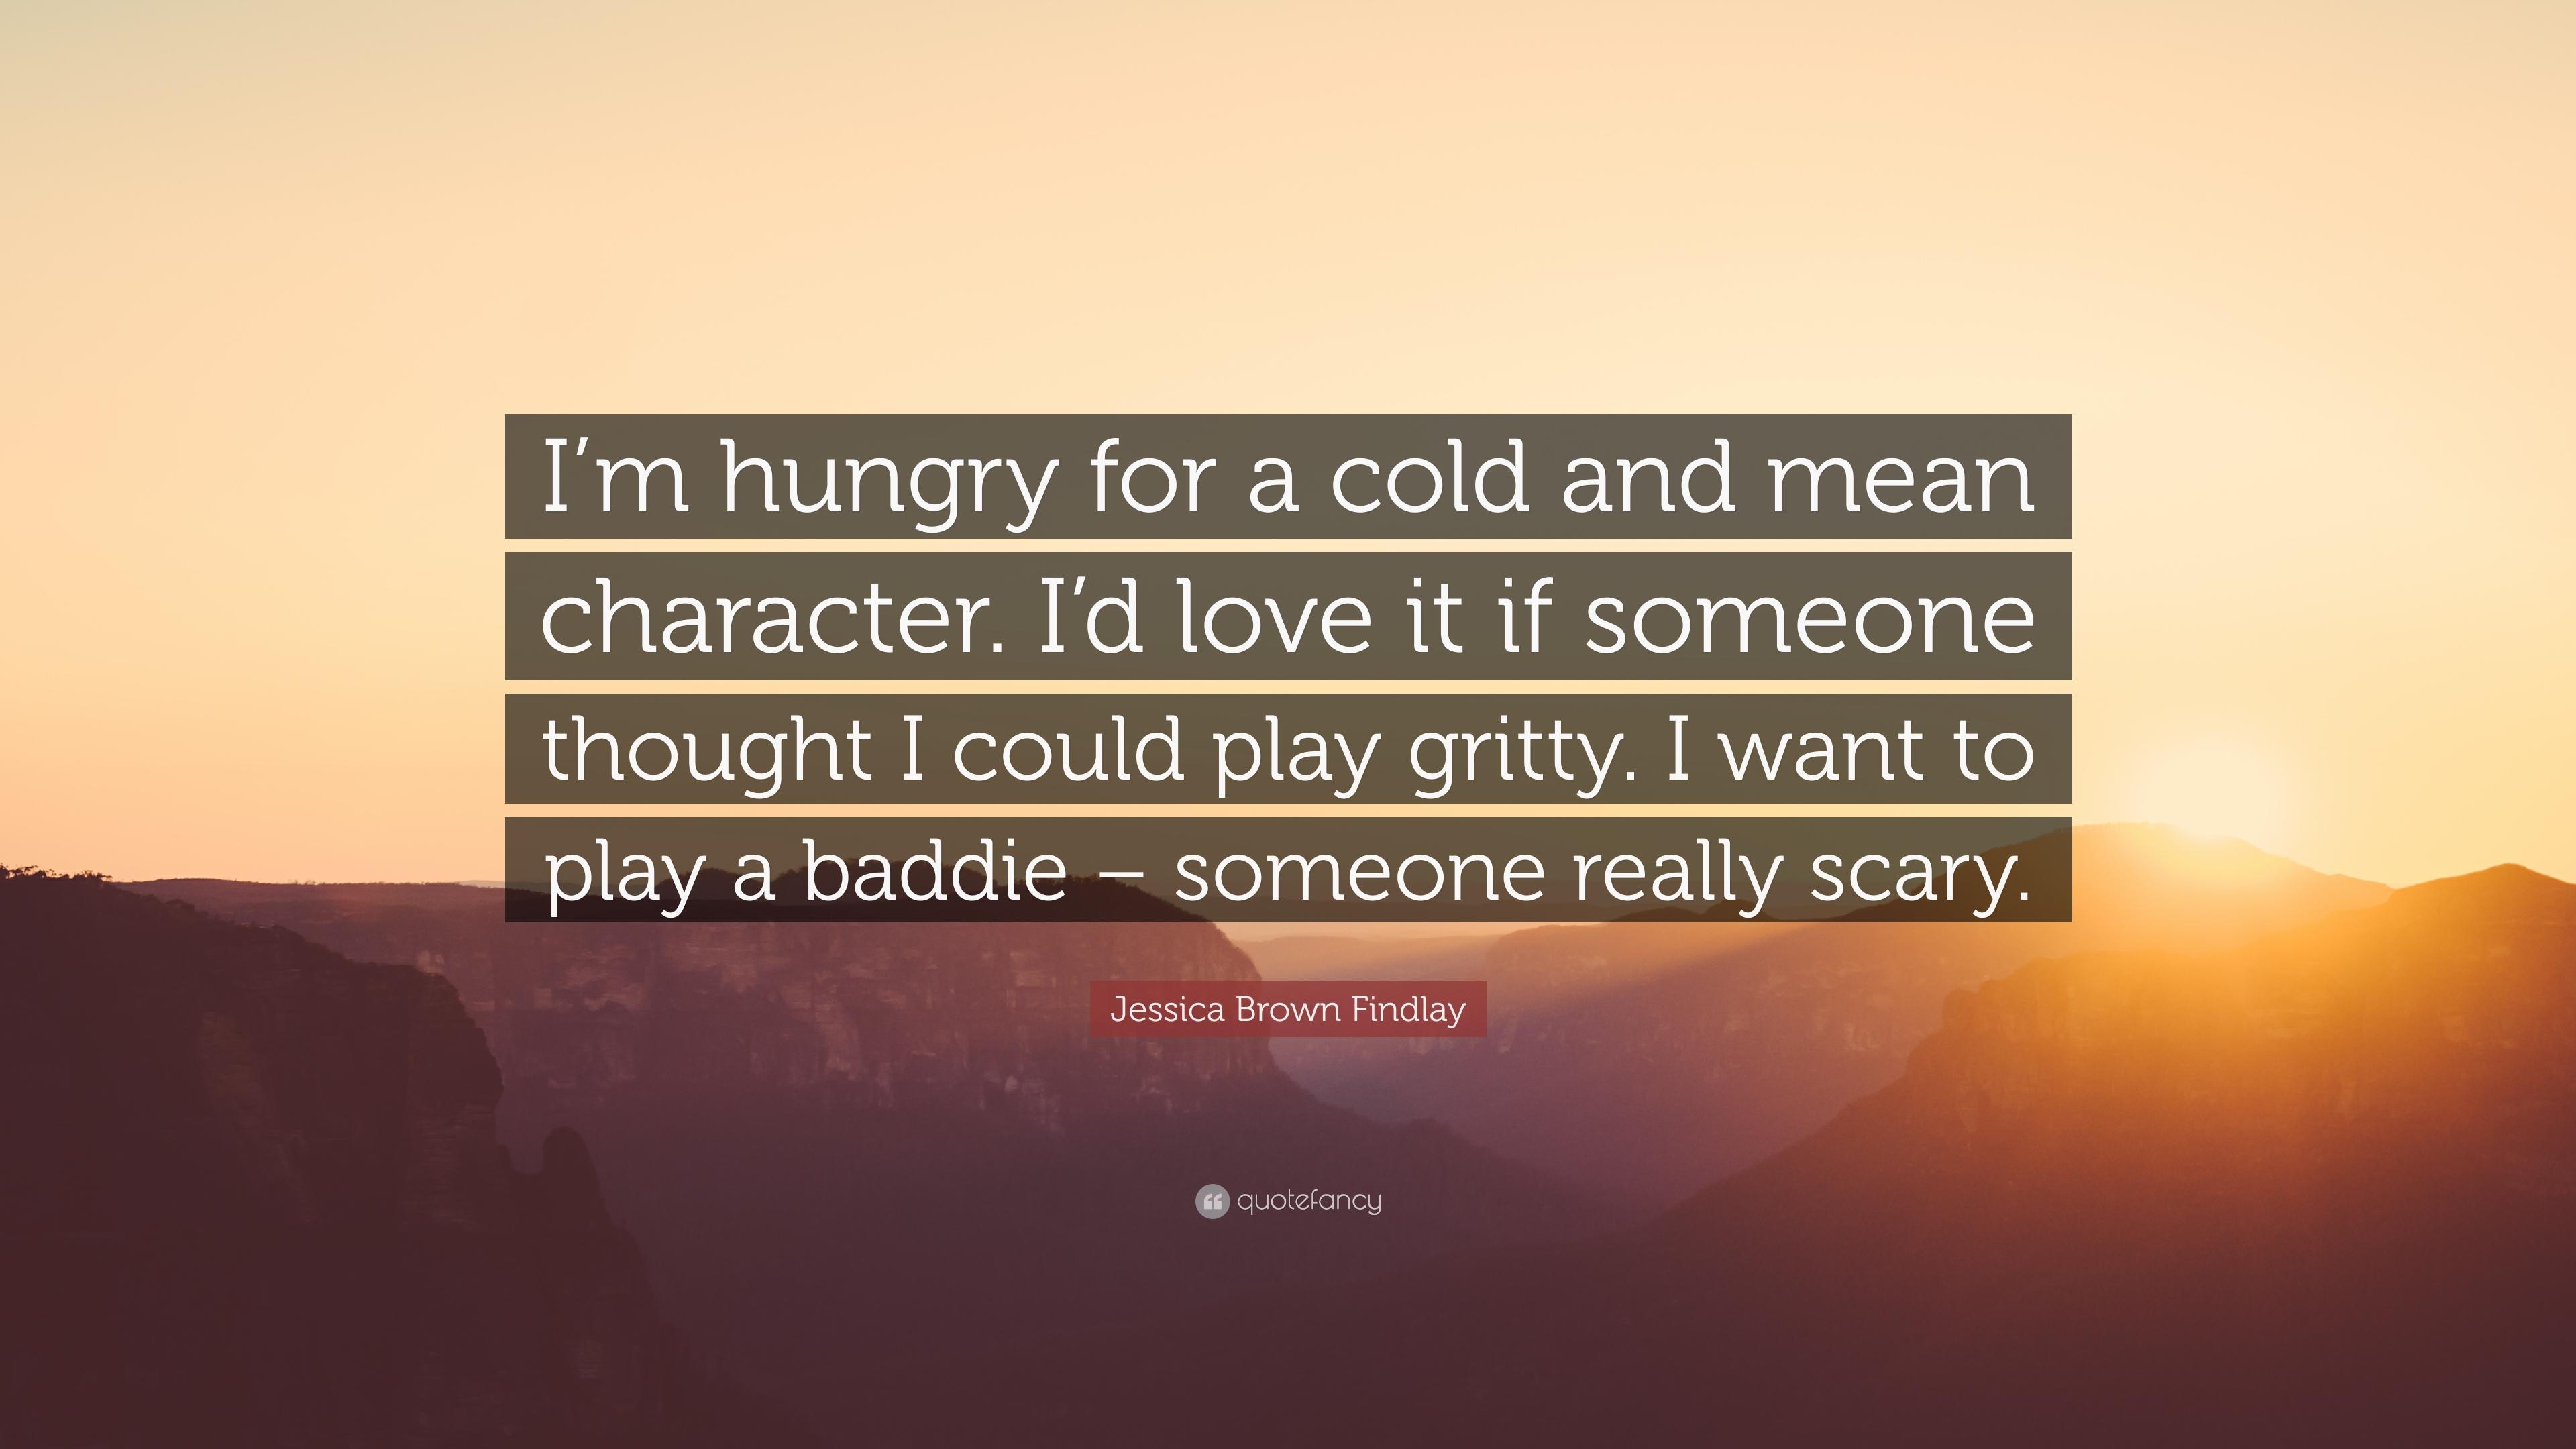 Jessica Brown Findlay Quote: “I'm hungry for a cold and mean